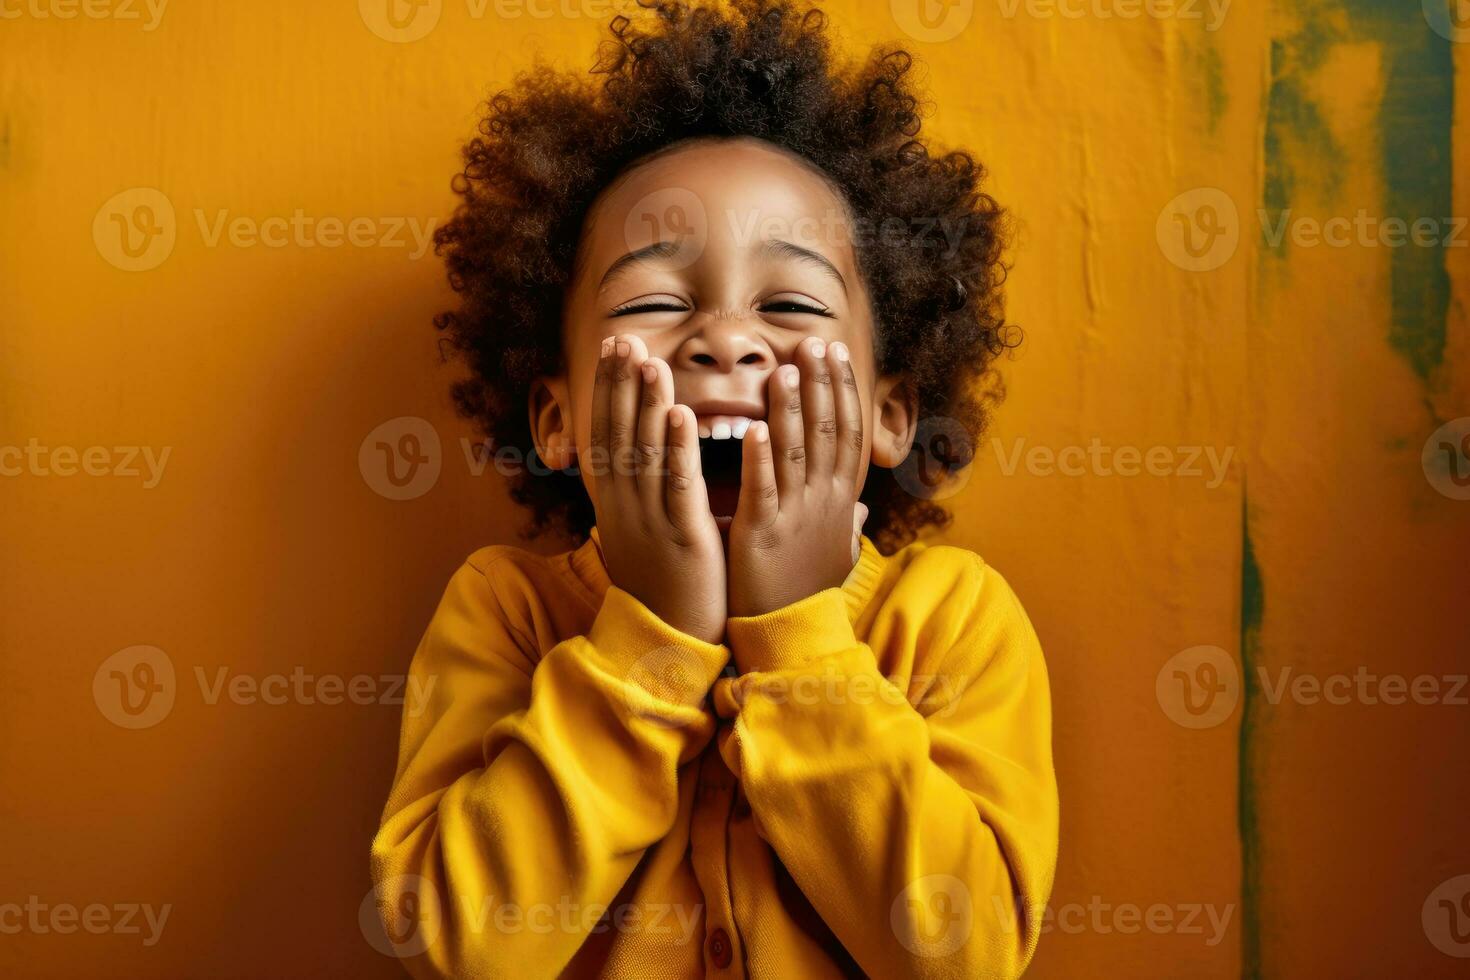 The Beauty of Childhood - A Close-Up Portrait of a Joyful Child in a Home Setting - AI generated photo